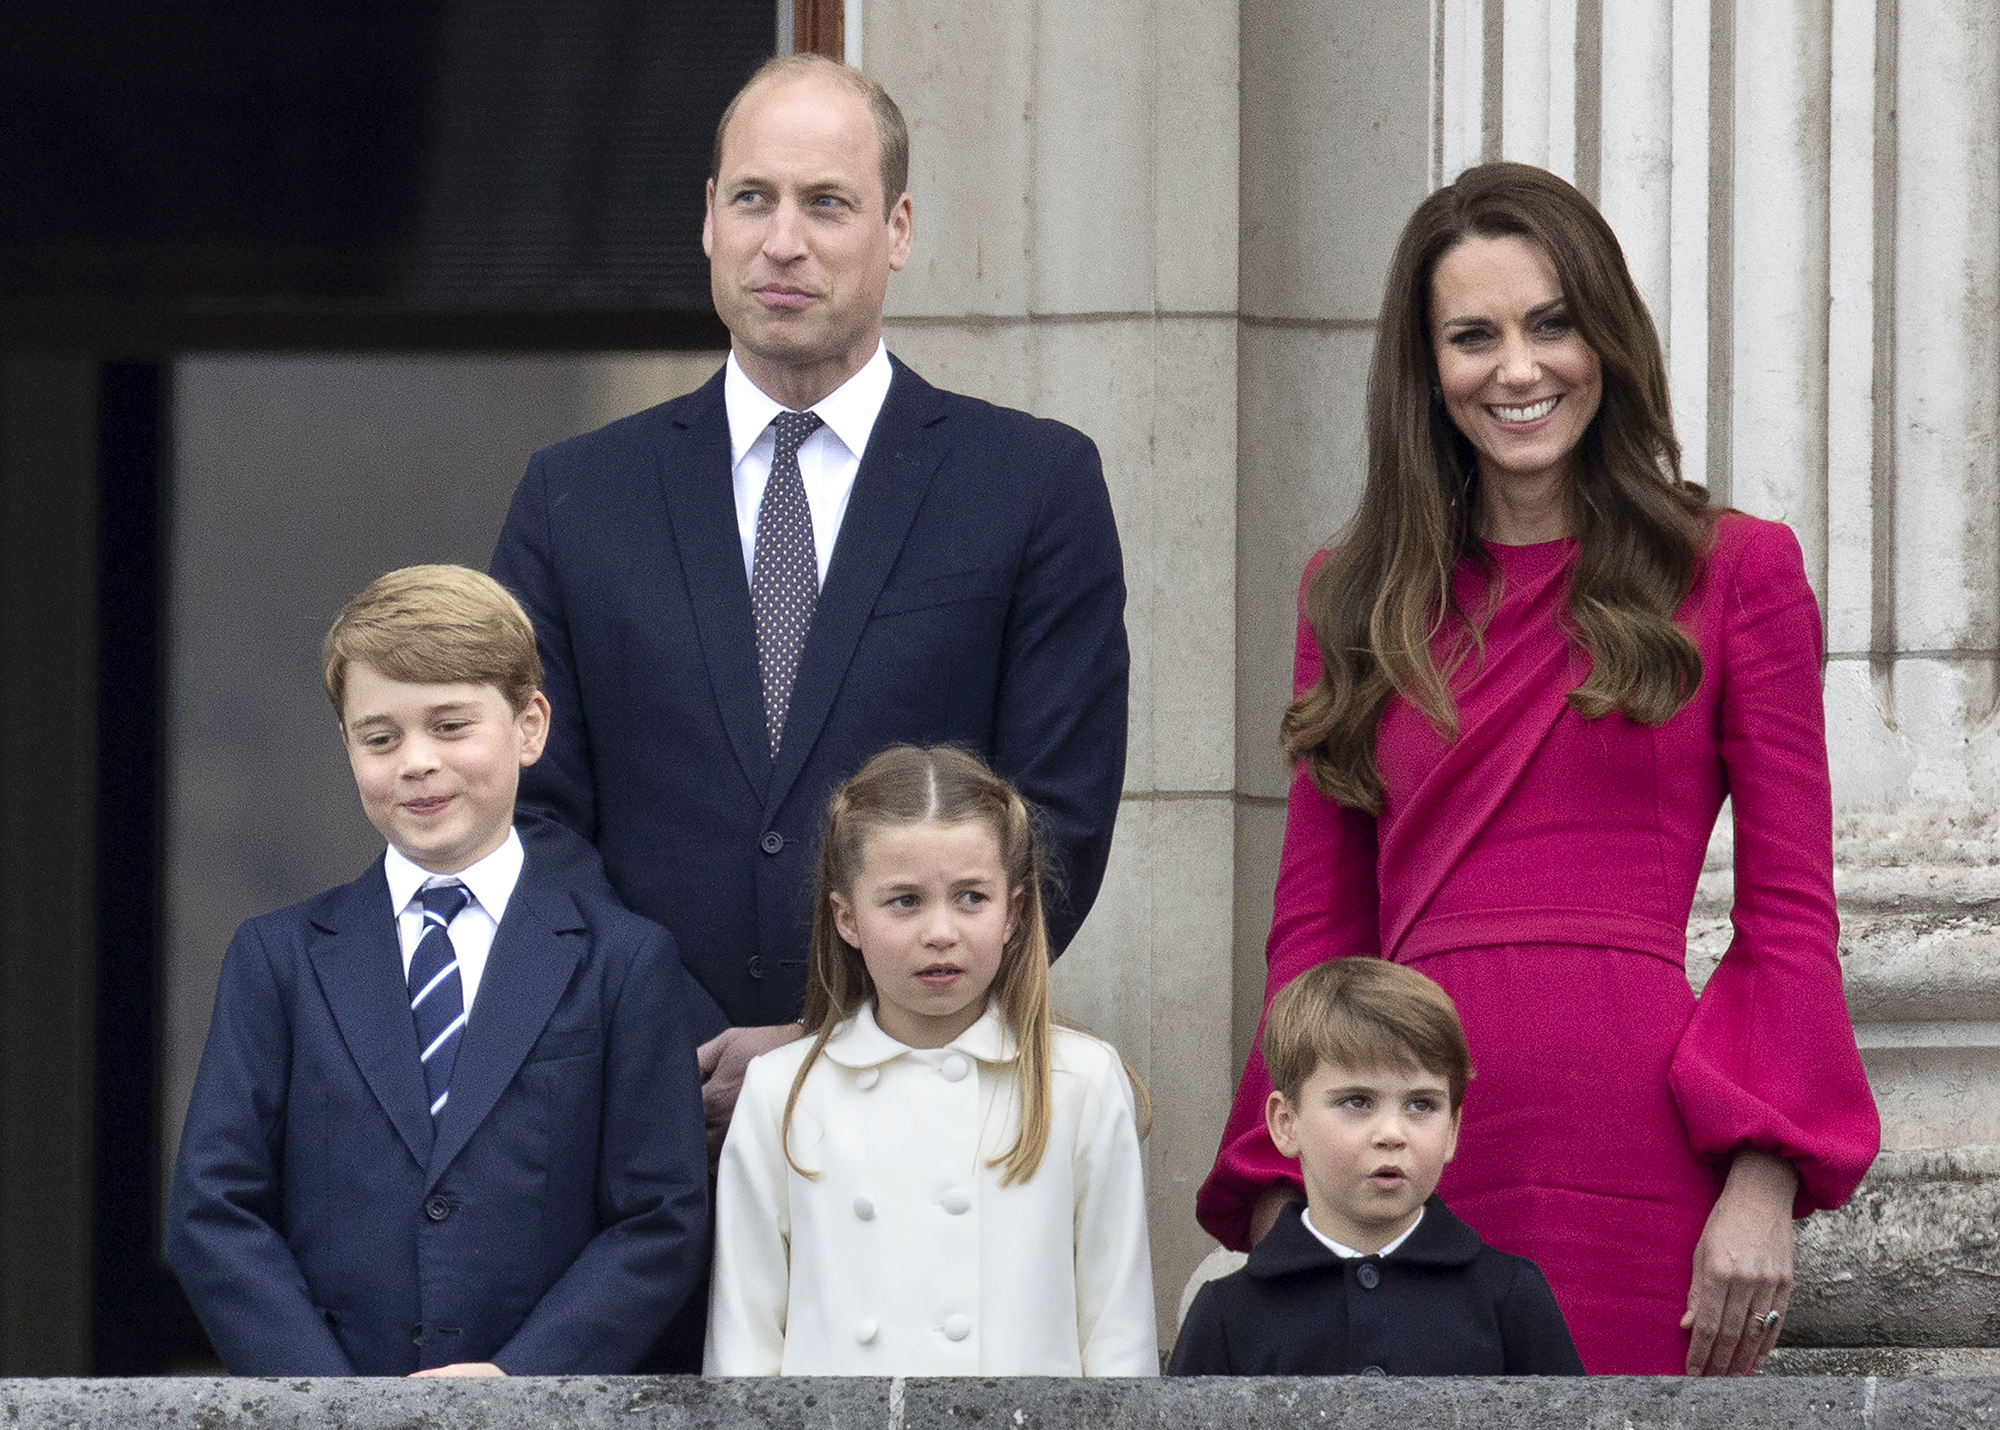 Princess Kate Shares Previously Unseen Family Photo With All 3 Children to Celebrate Mother’s Day